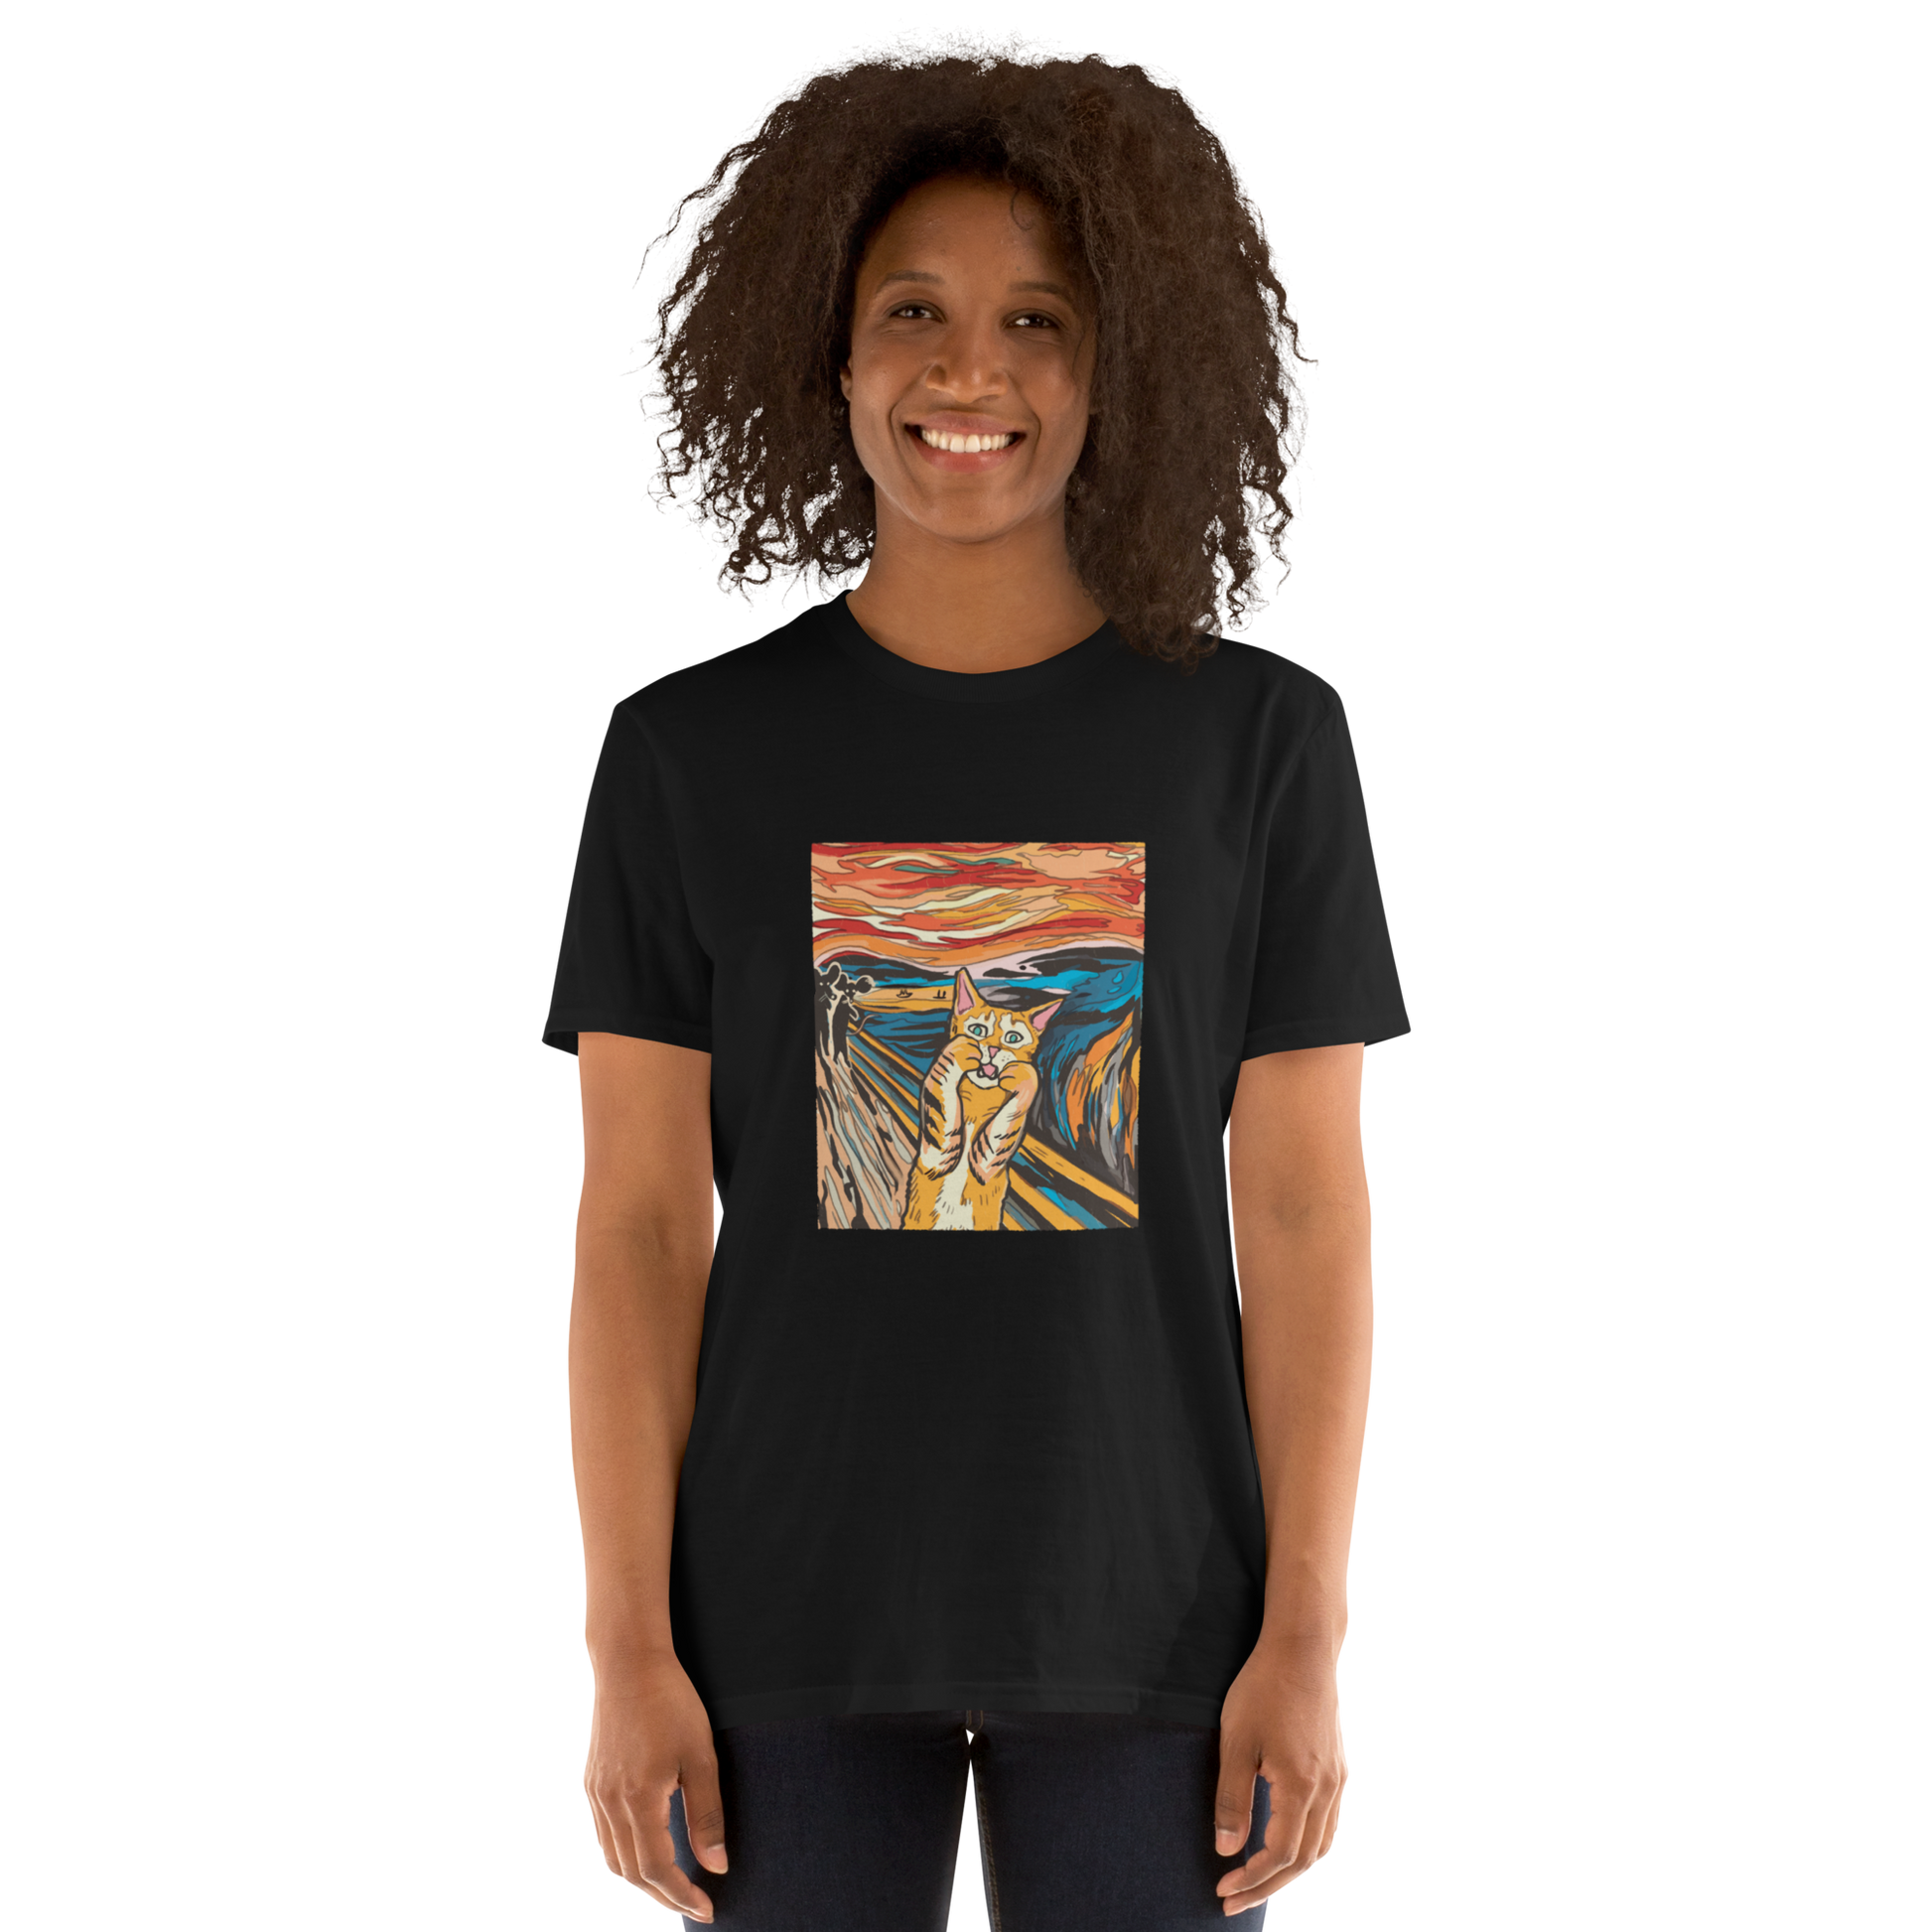 Smiling woman wearing a Black Screaming Cat T-Shirt showcasing iconic The Screaming Cat graphic on the chest - Funny Graphic Cat T-Shirts - Boozy Fox